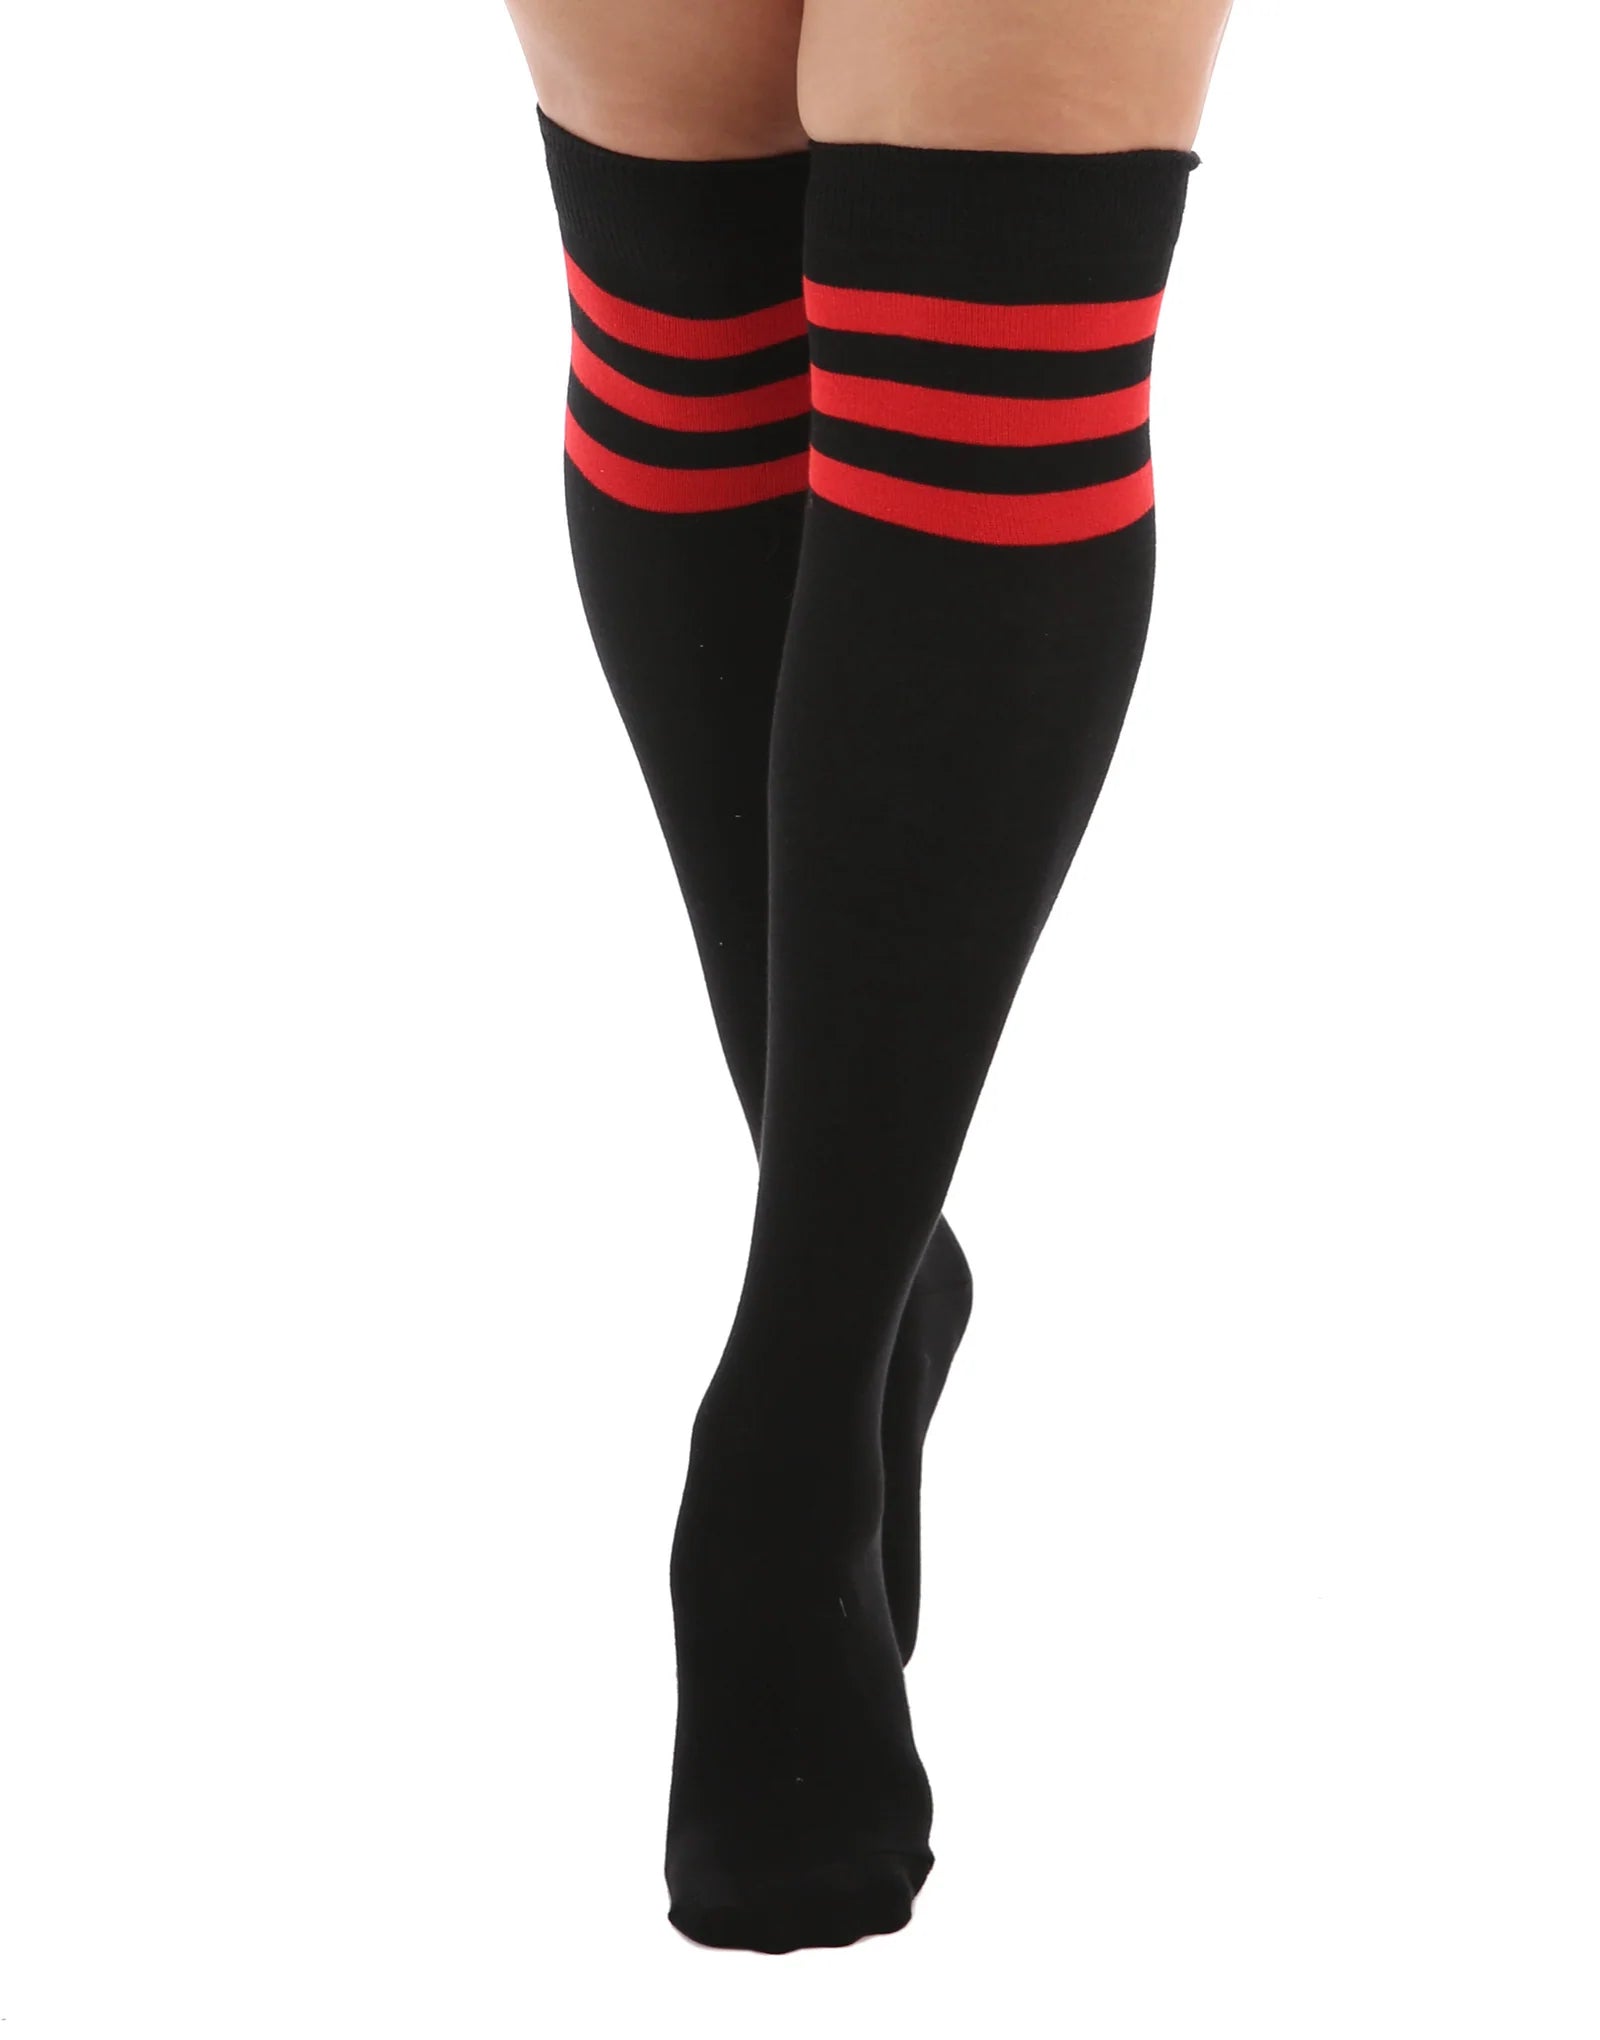 Referee Over The Knee Socks in Black with Red or White Stripes